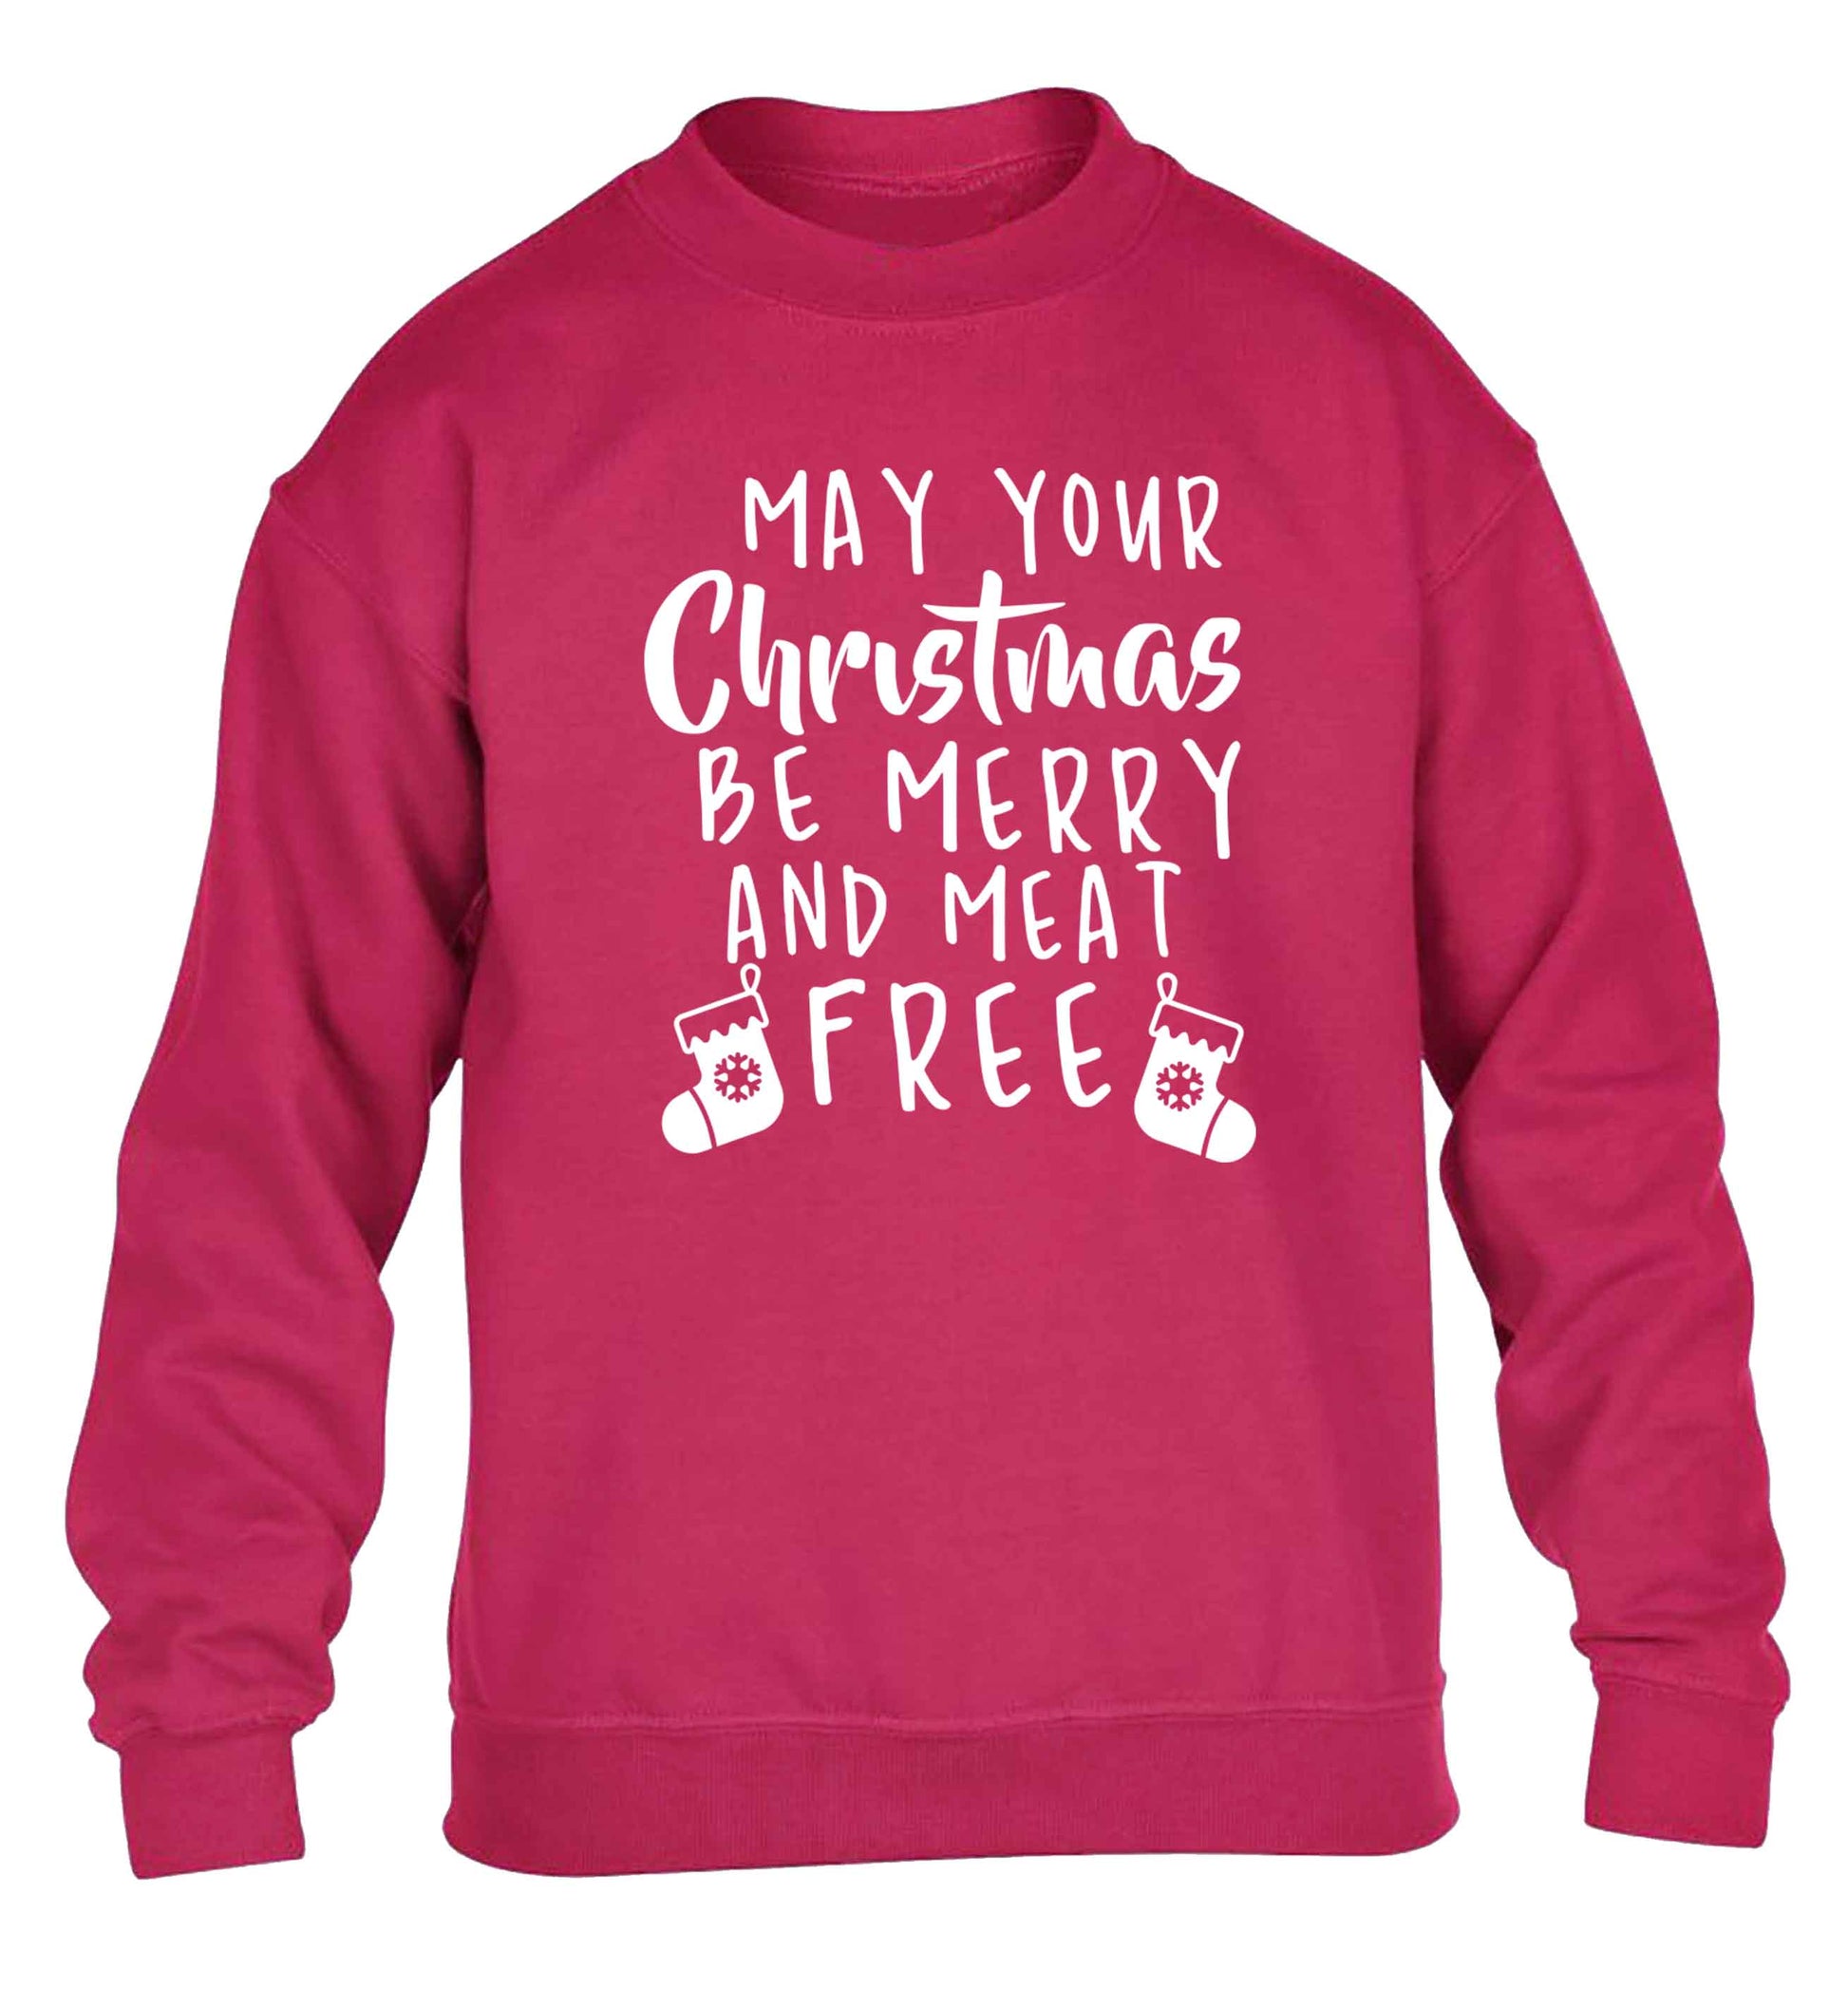 May your Christmas be merry and meat free children's pink sweater 12-13 Years